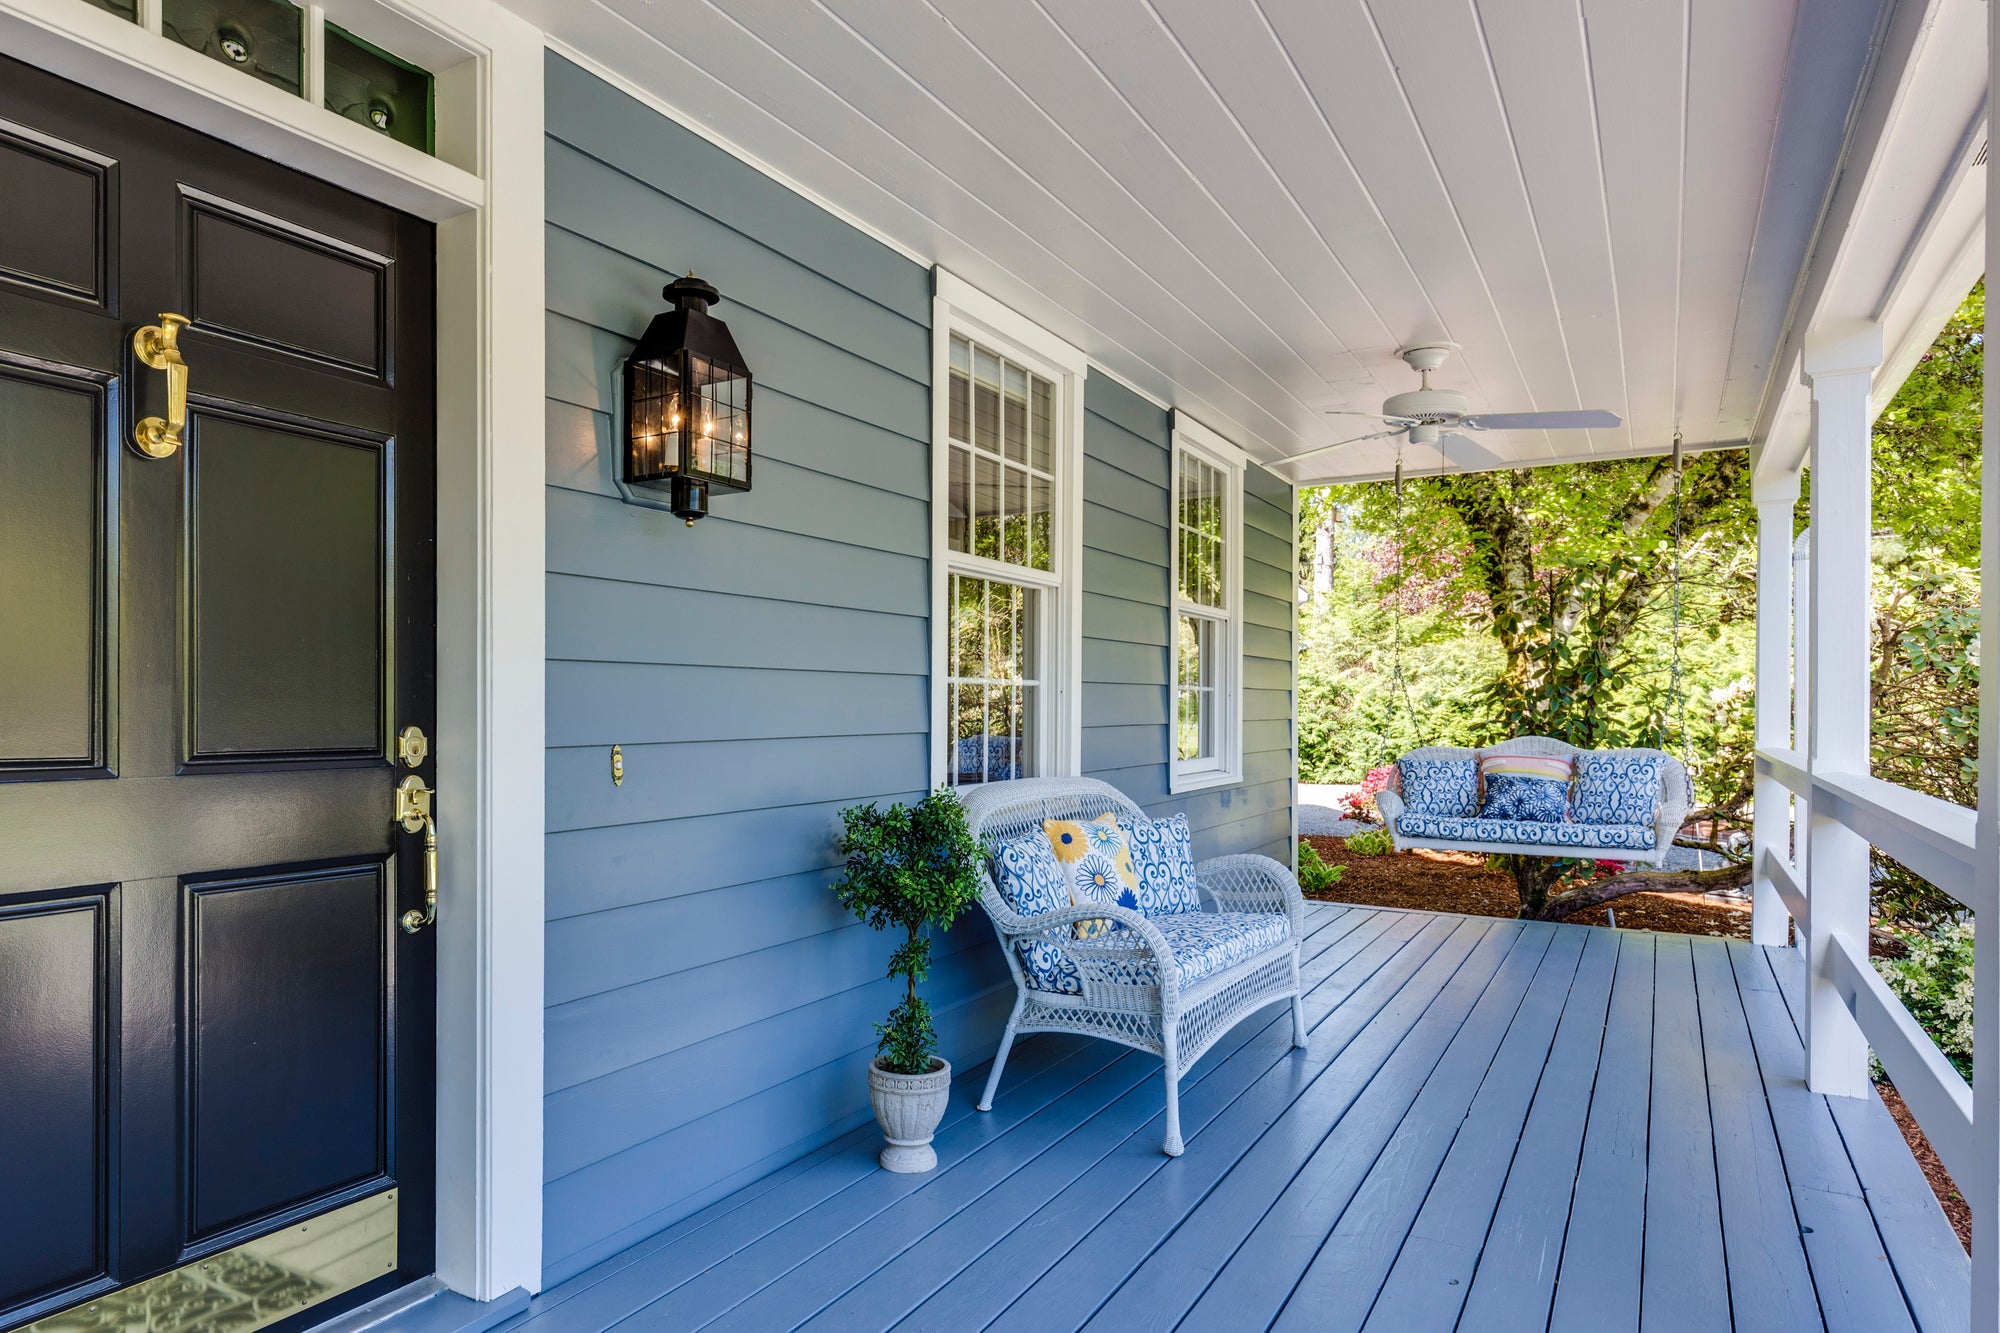 Charming Small Porch Design Ideas that Maximize Curb Appeal